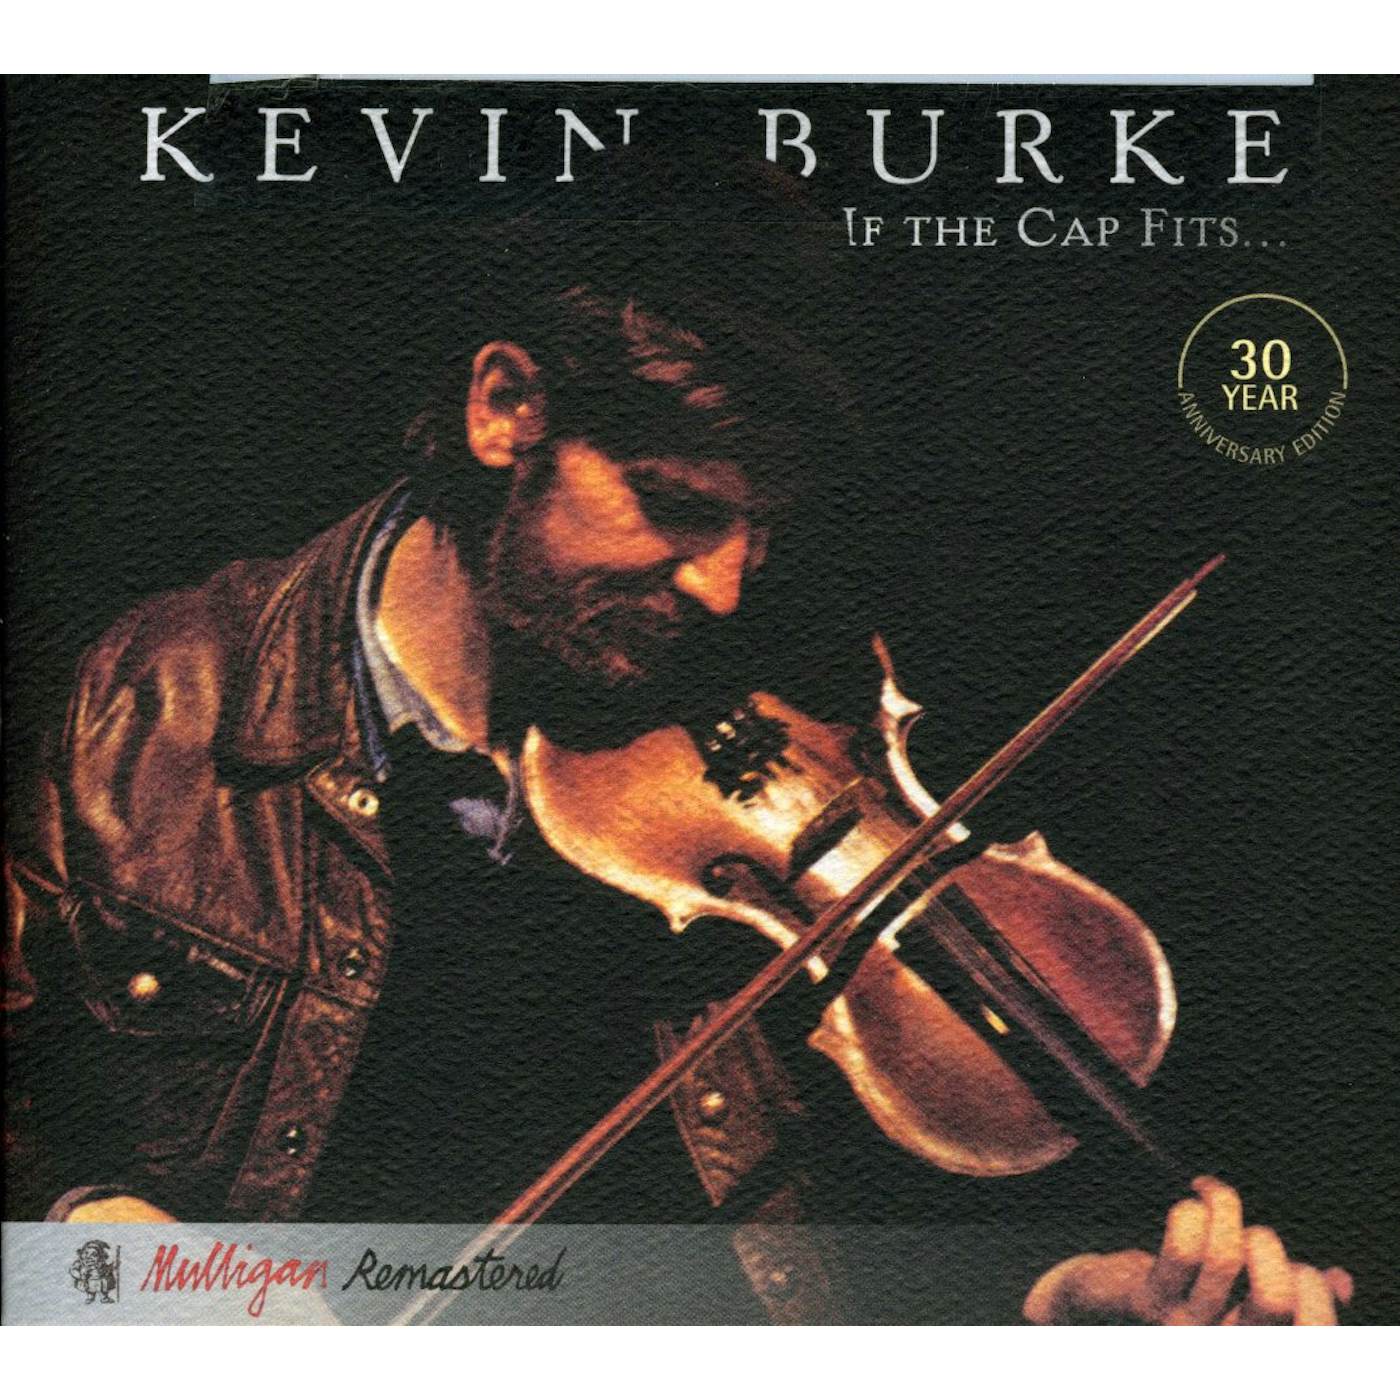 Kevin Burke IF THE CAP FITS CD